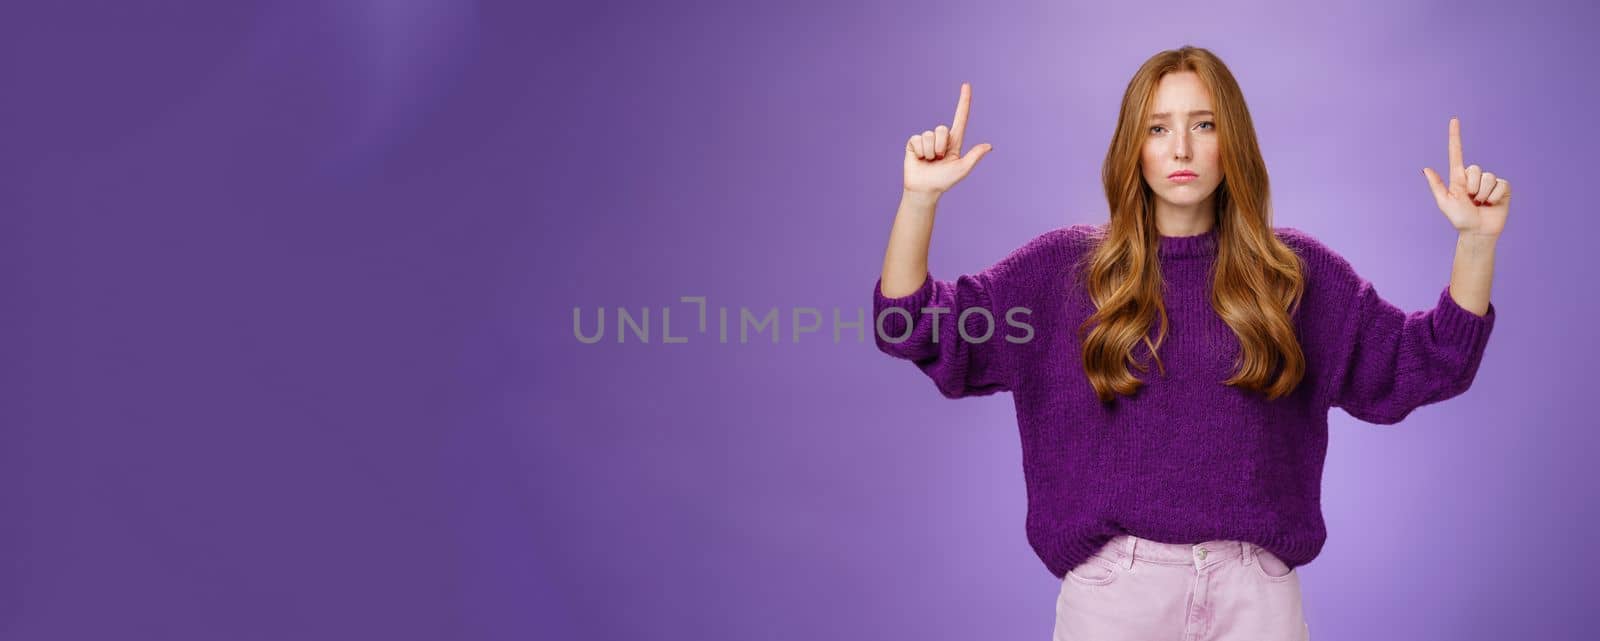 Disappointed gloomy and moody attractive redhead woman with freckles in warm sweater raising hands pointing up and reacting with sadness and regret on product or copy space, being unsatisfied, unhappy.